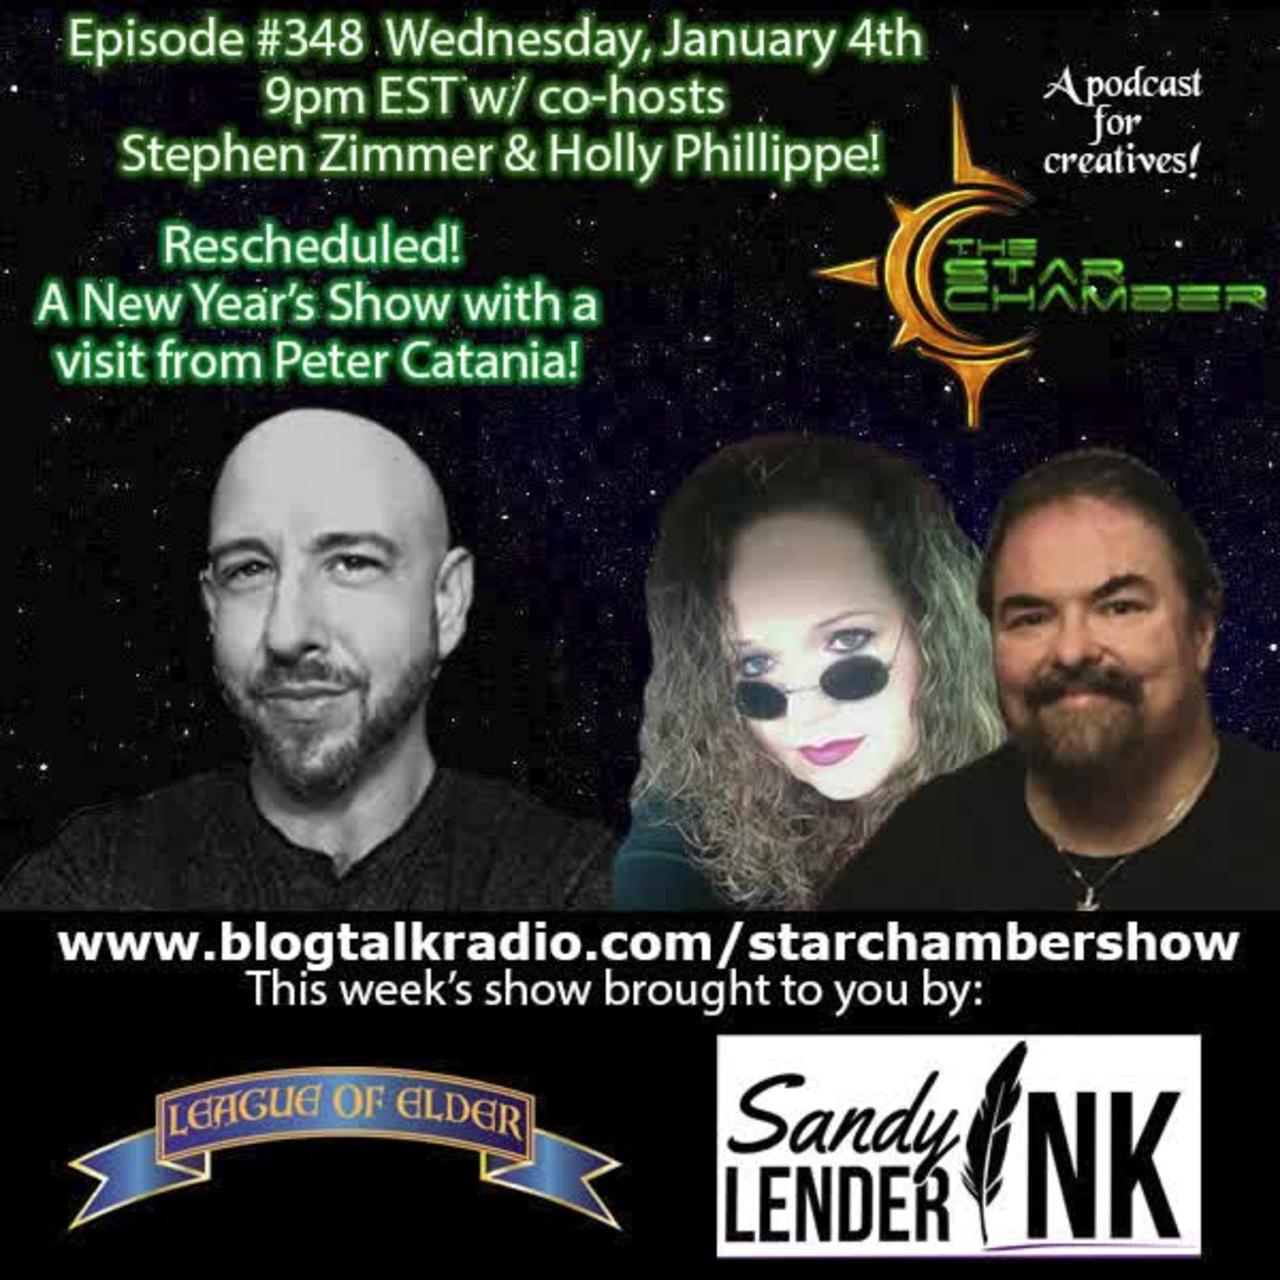 The Star Chamber Show Live Podcast - Episode 348 - Featuring Peter Catania